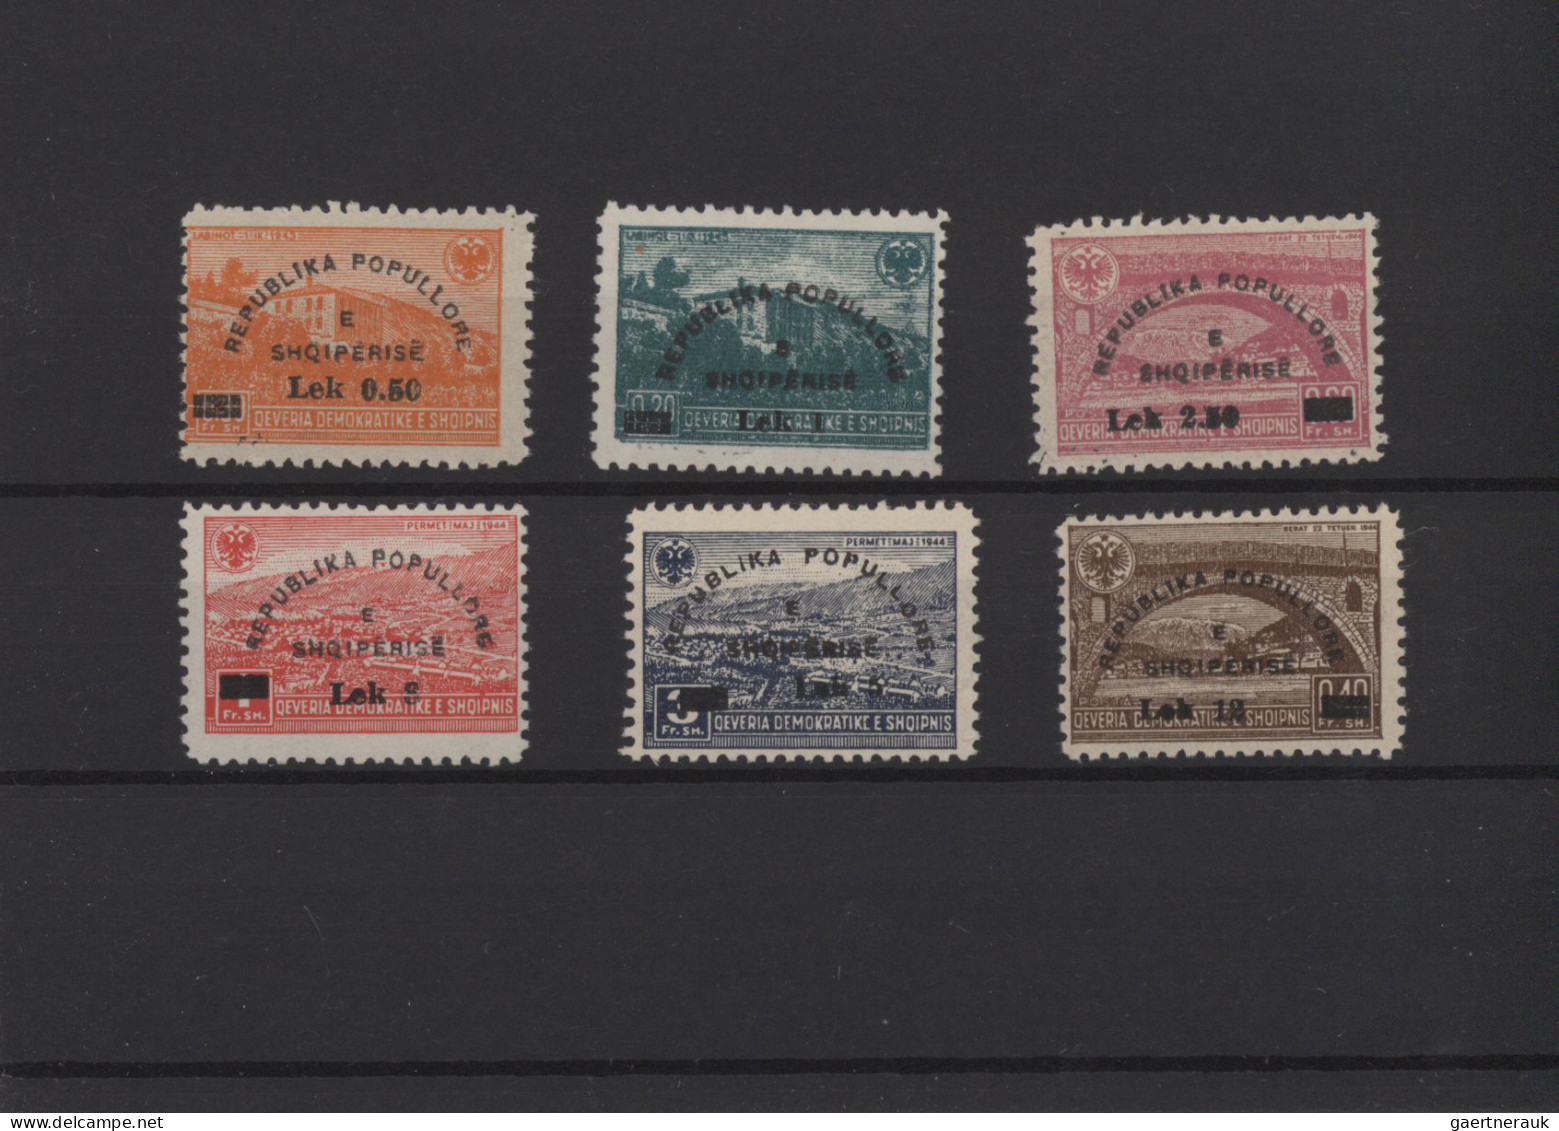 Albania: 1938/1996 (ca.), accumulation mostly MNH on stockcards with a very nice